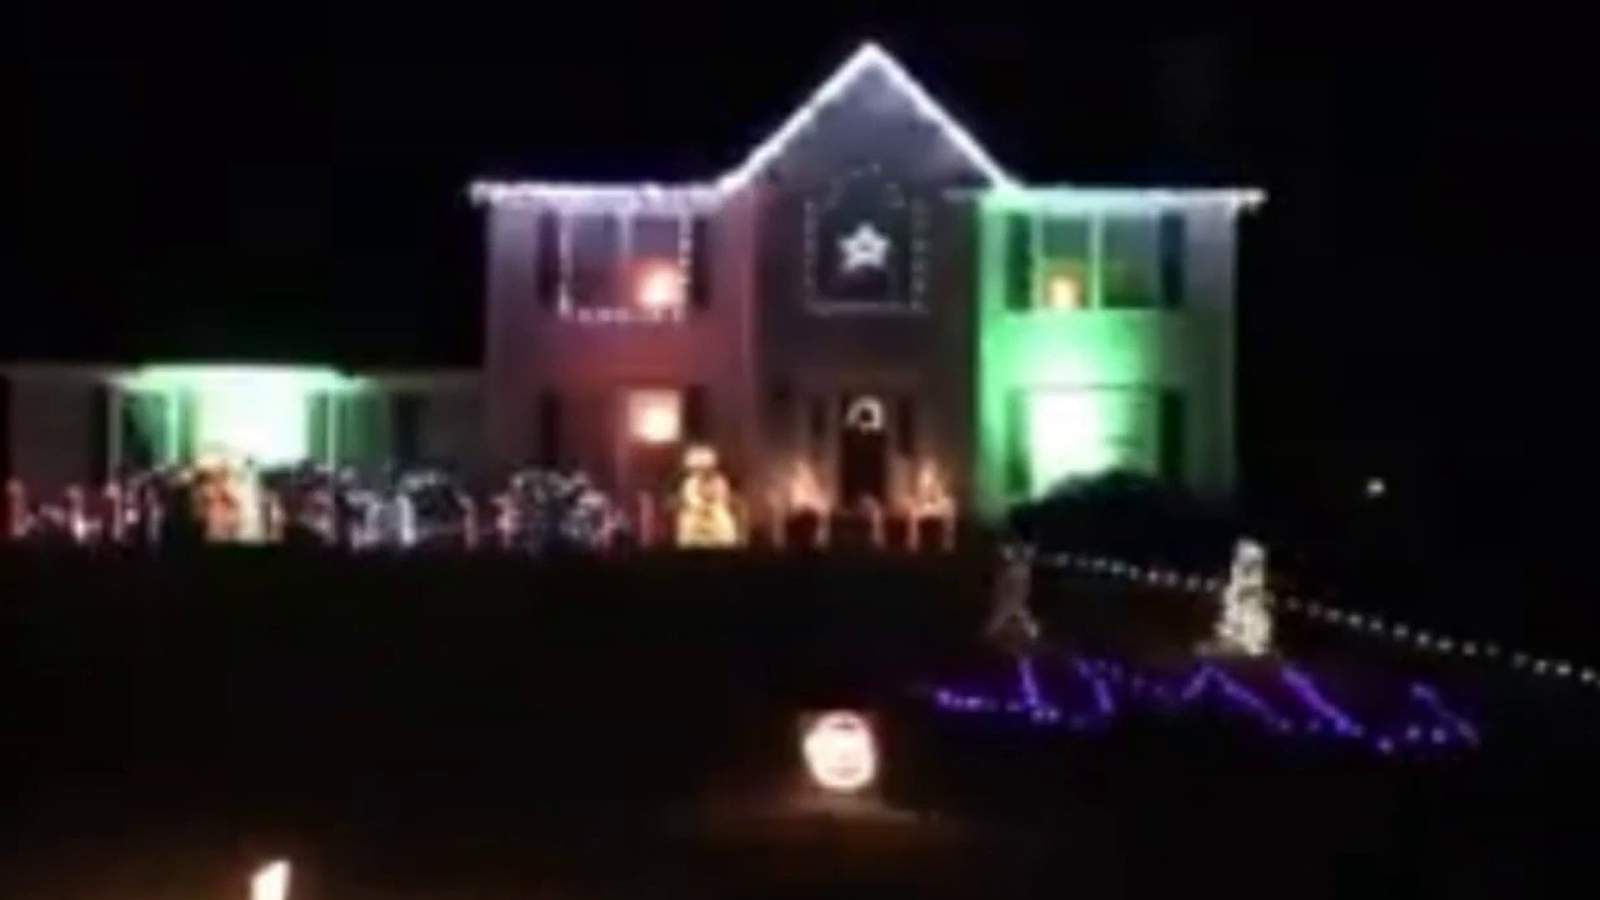 Christiansburg’s looking to crown a Christmas lights champion